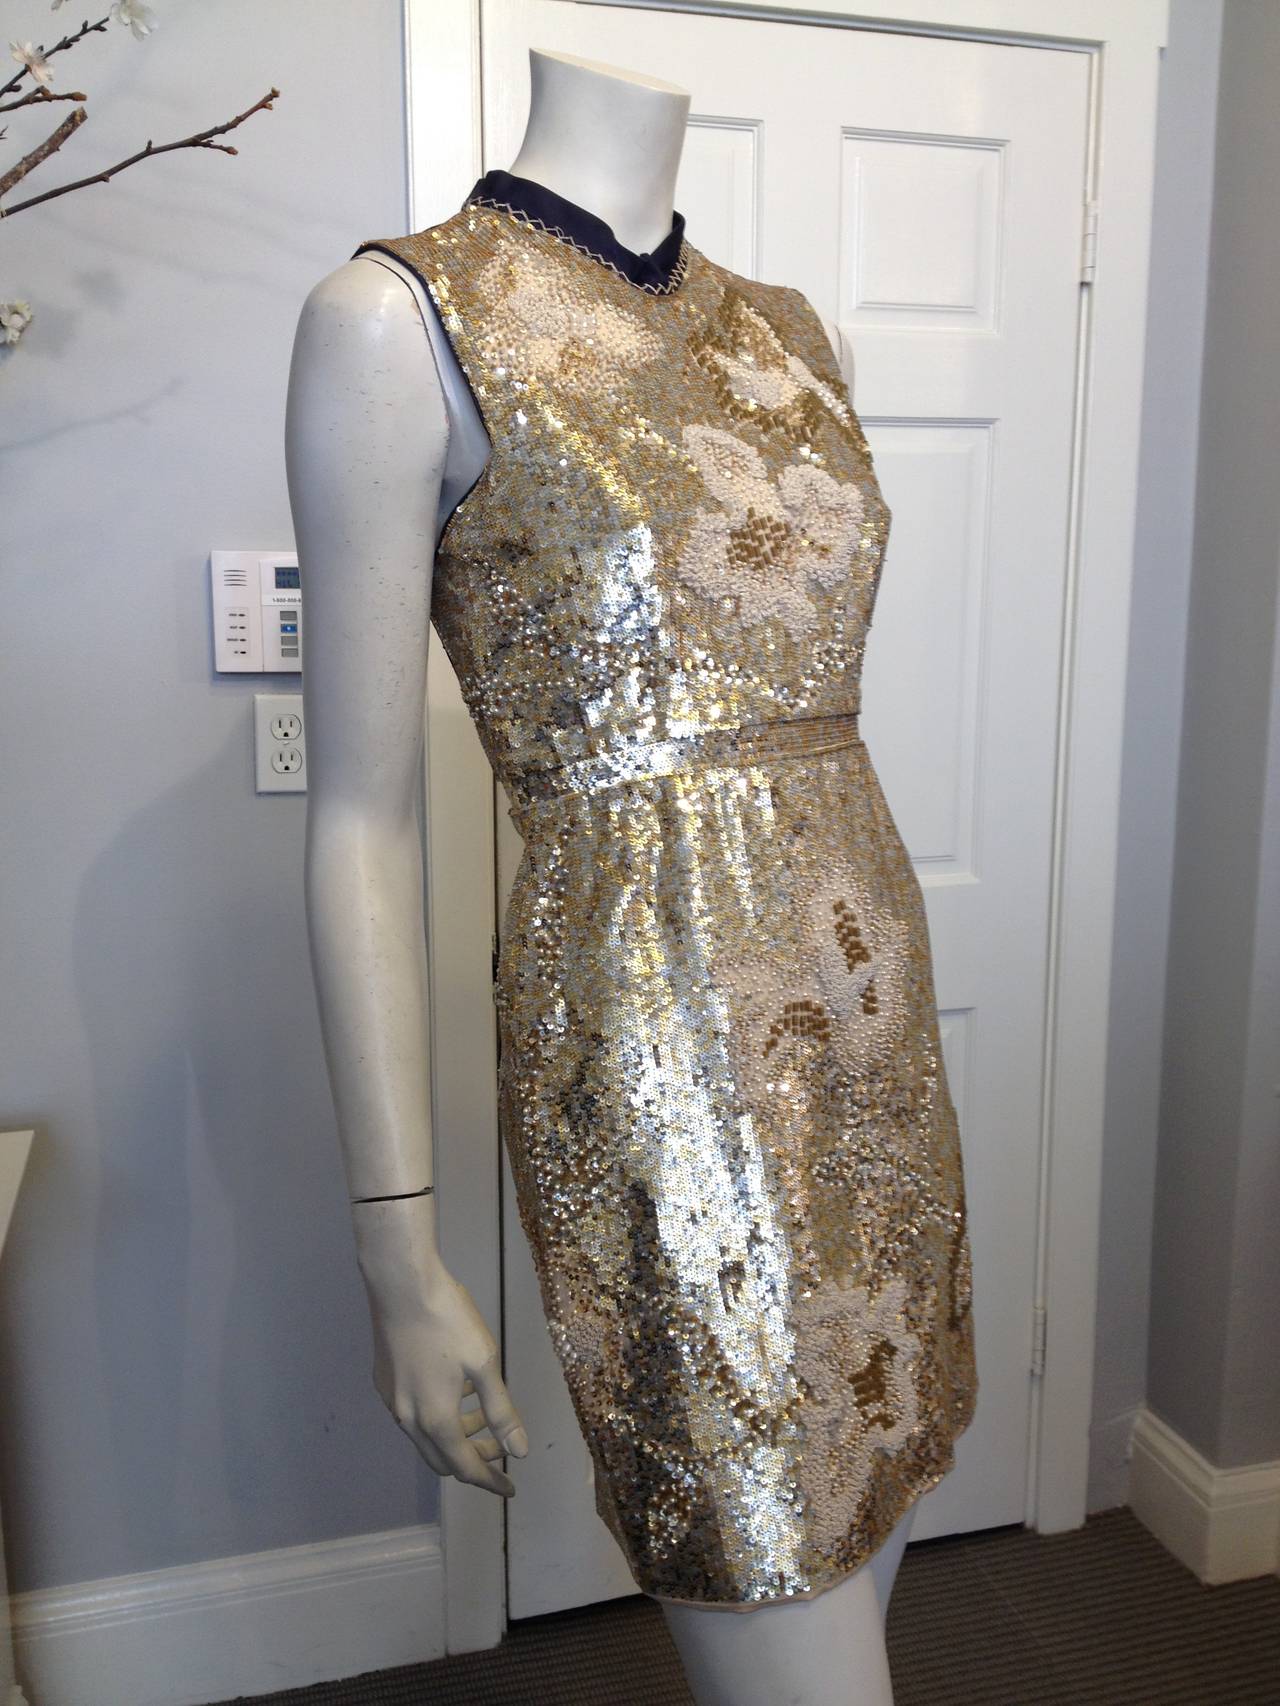 This 6267 cocktail dress is the perfect piece for making an impact. The navy satin backing is covered with a blanket of gold and silver sequins, champagne-colored embroidery, seed beads, and pearls, all of which form delicate blossoming textural